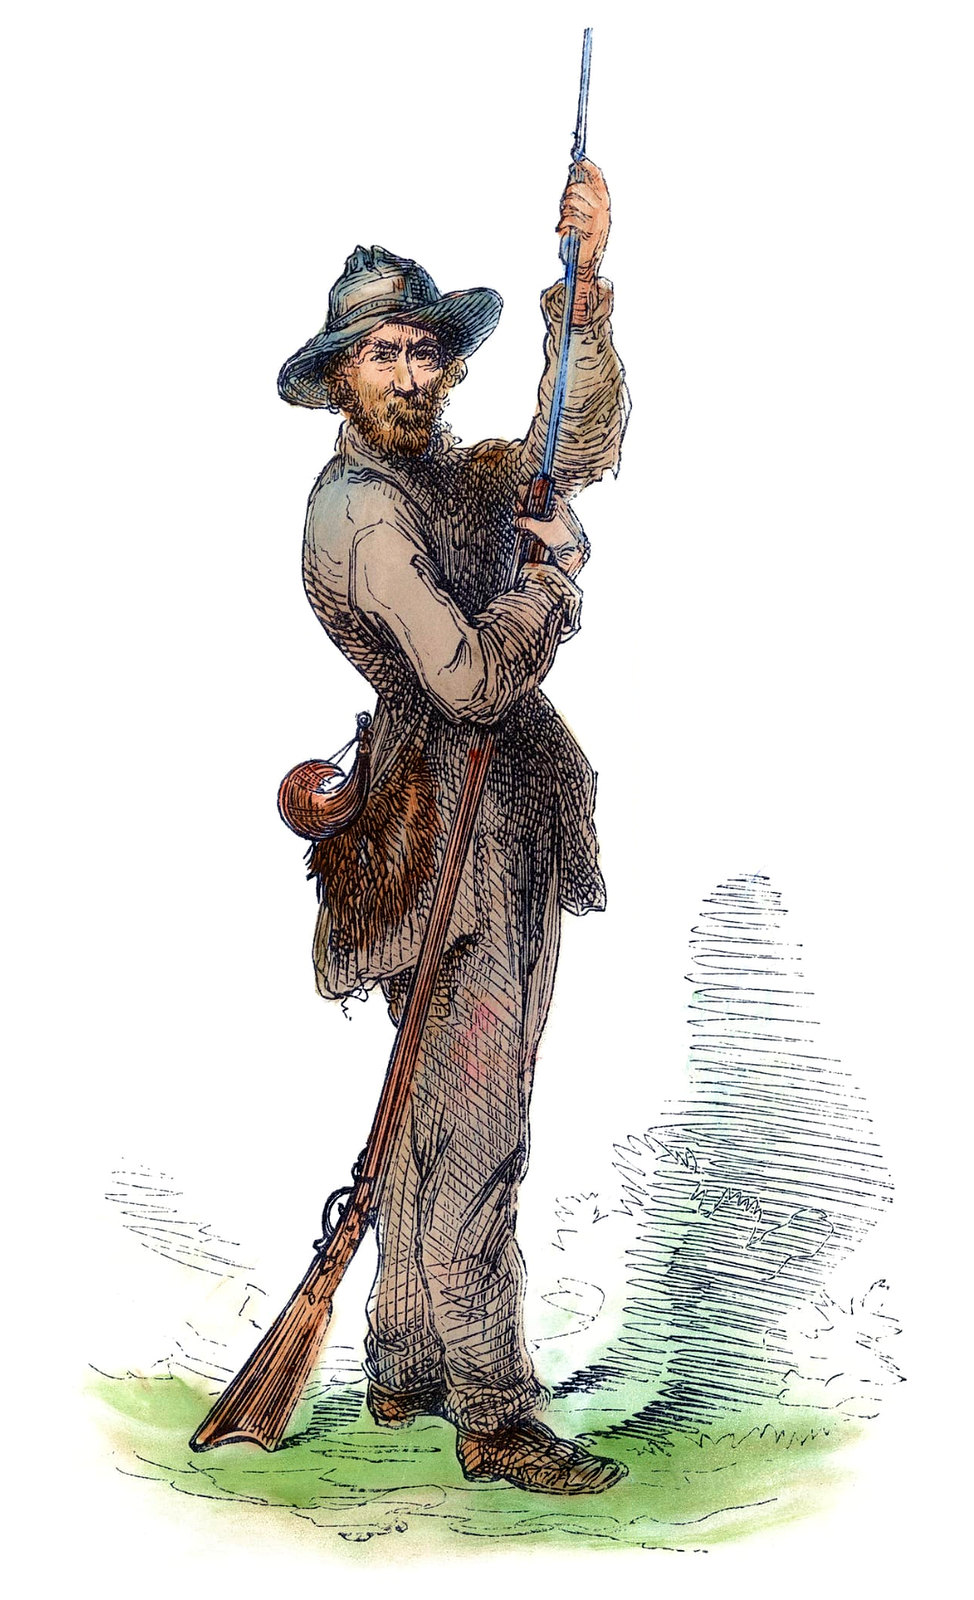 A bushwhacker, or Confederate guerilla fighter. Wood engraving, American, 1867